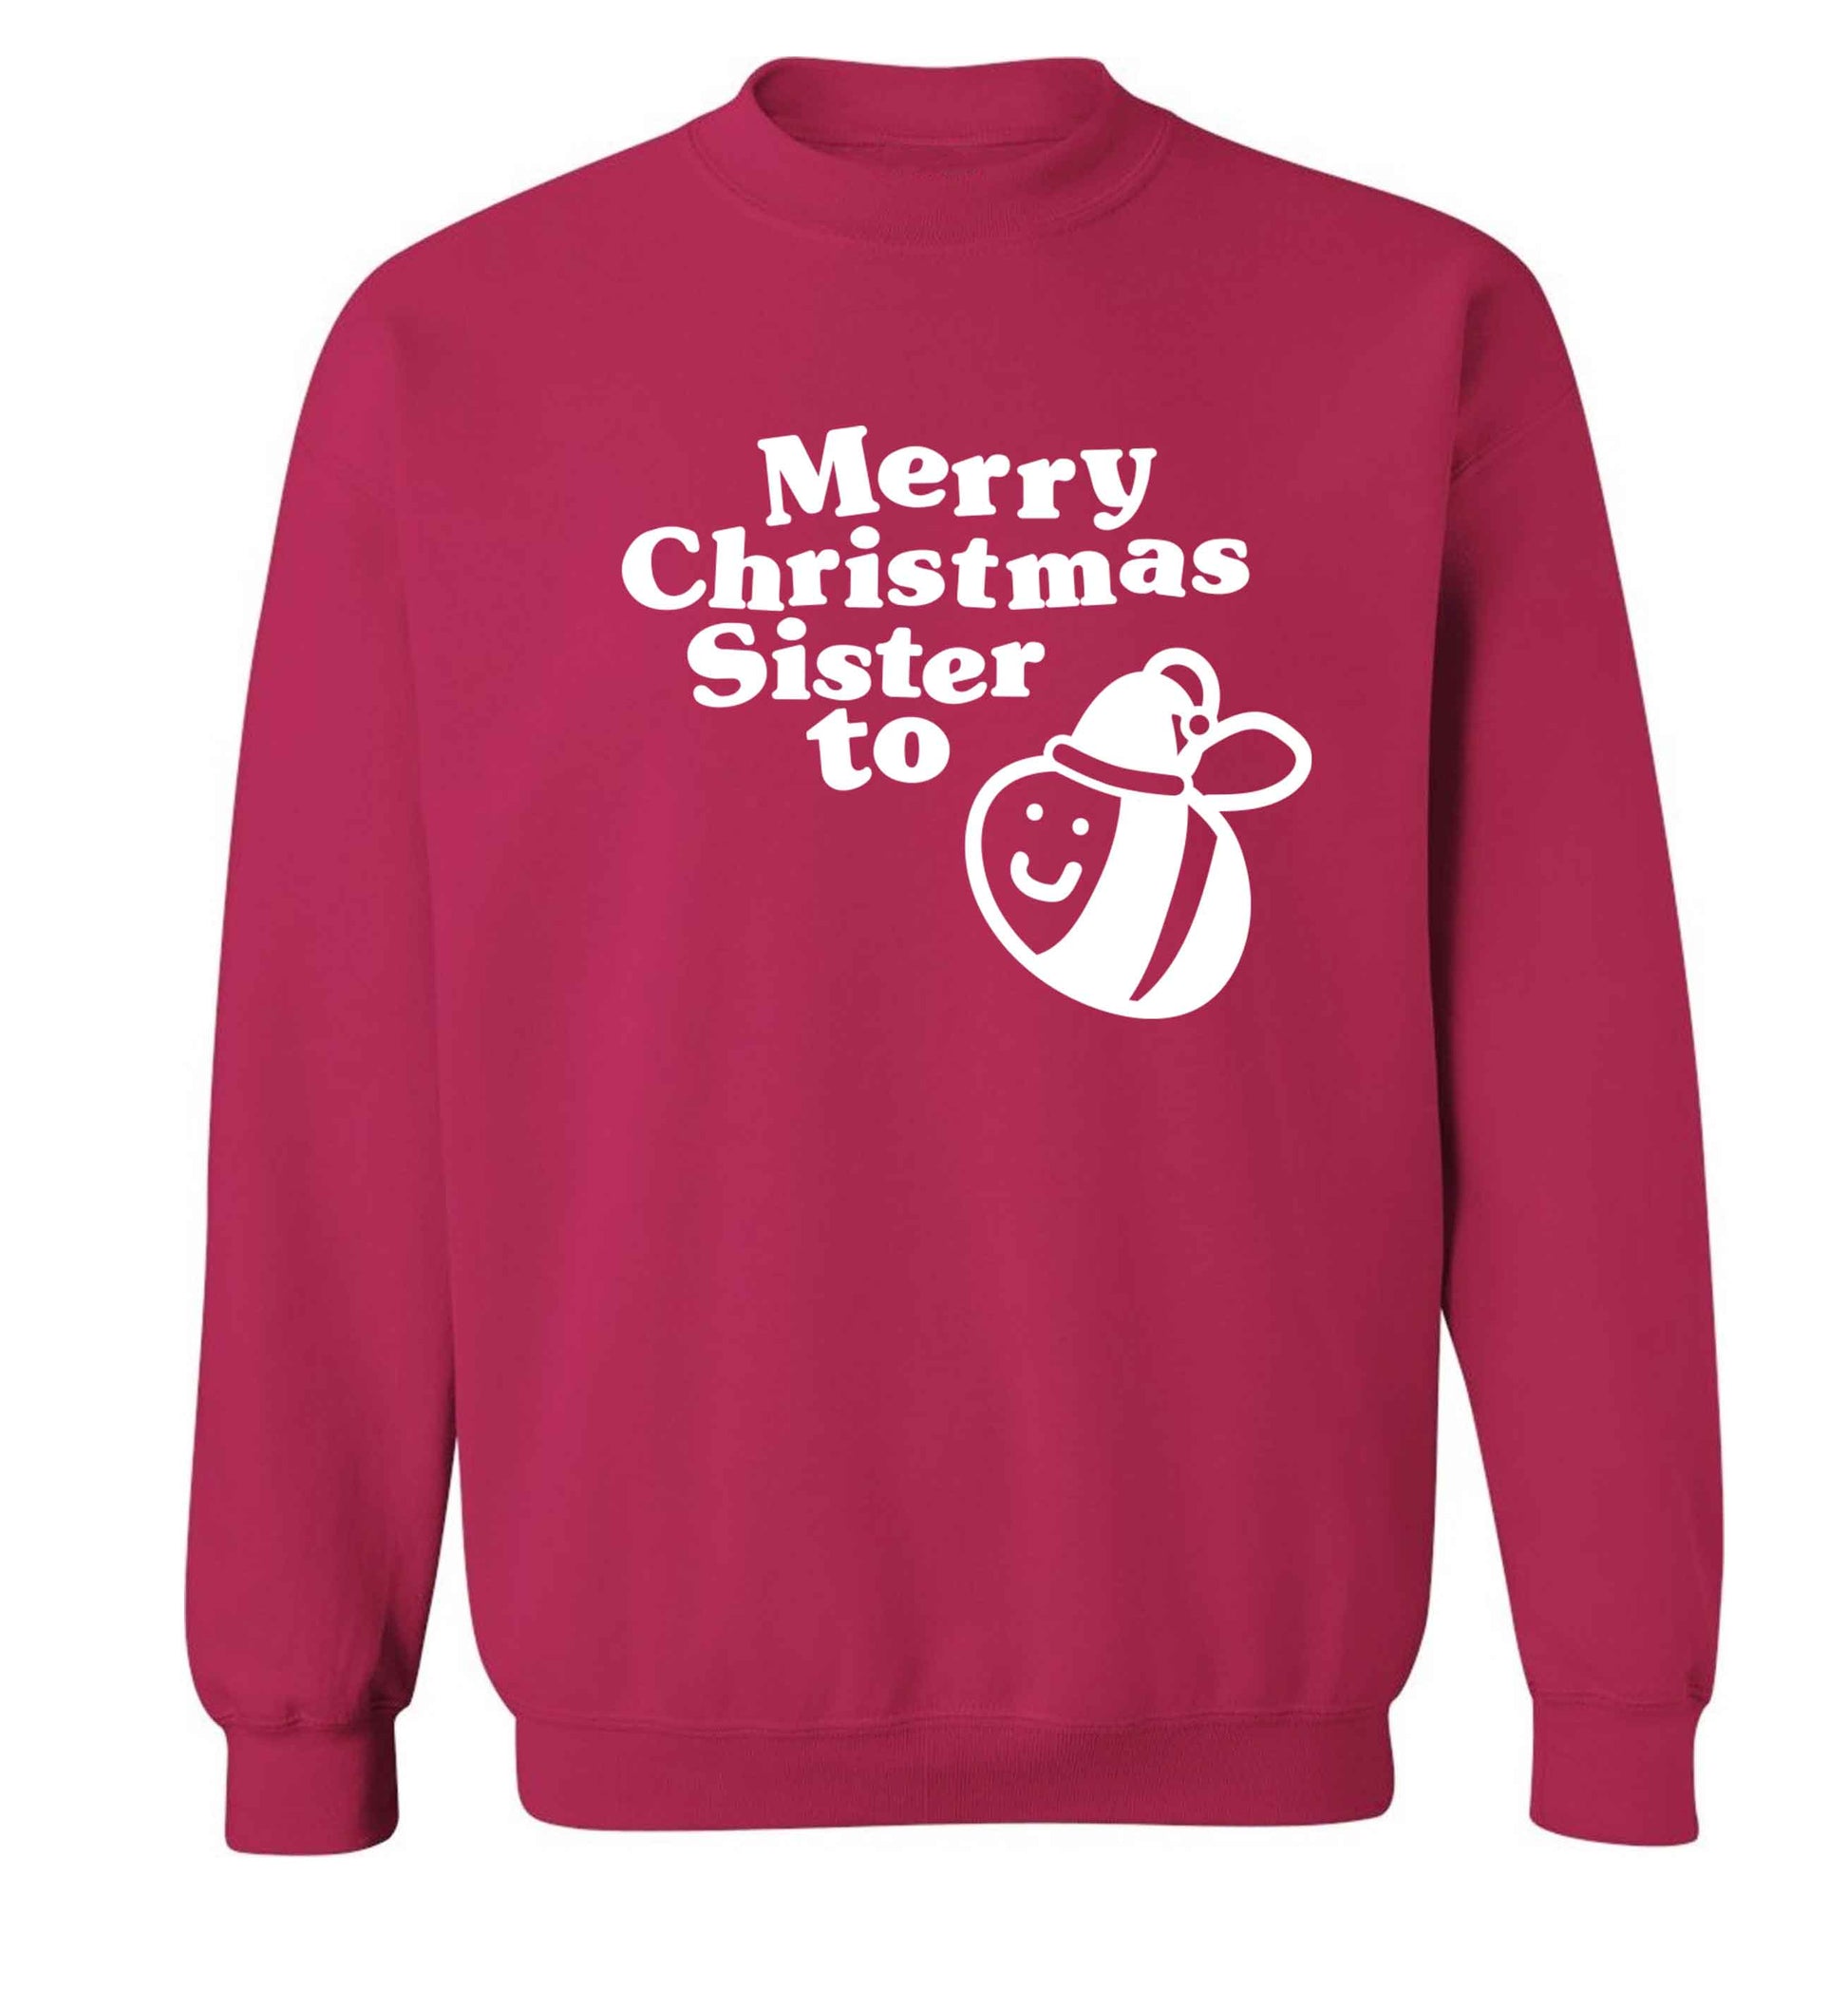 Merry Christmas sister to be Adult's unisex pink Sweater 2XL